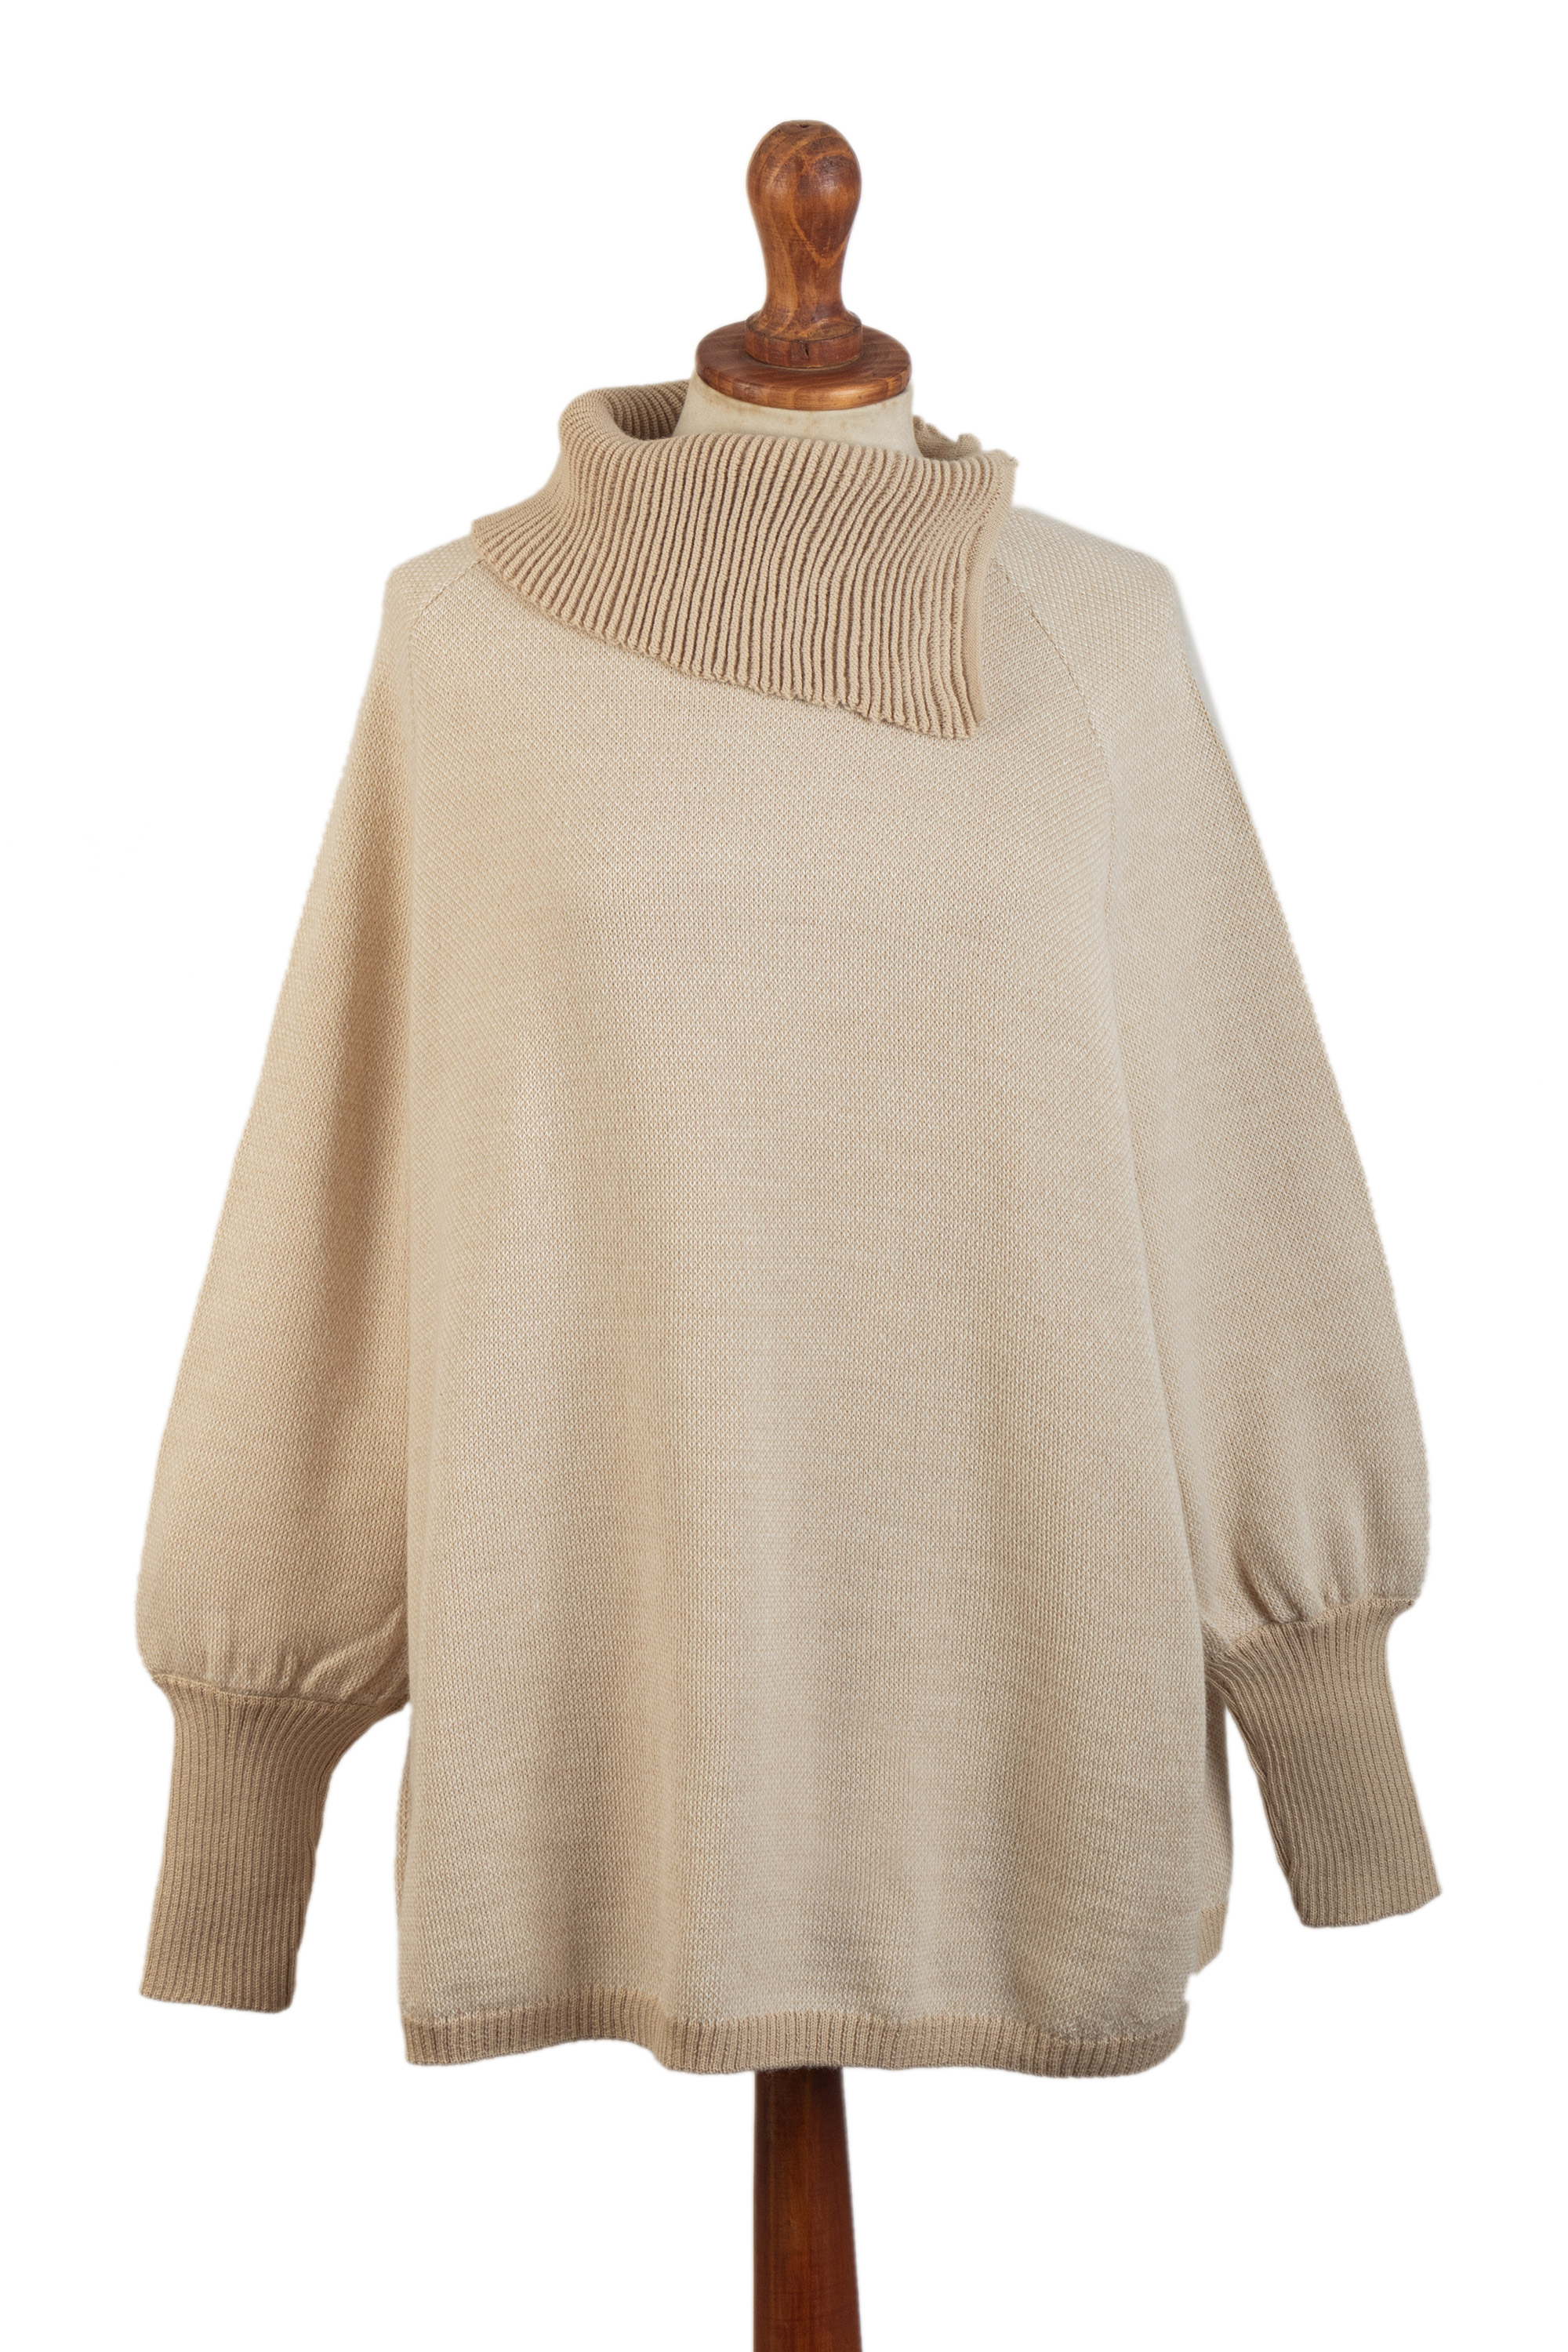 Knit Beige Baby Alpaca Turtleneck Poncho with Sleeve Cuffs - Andean ...